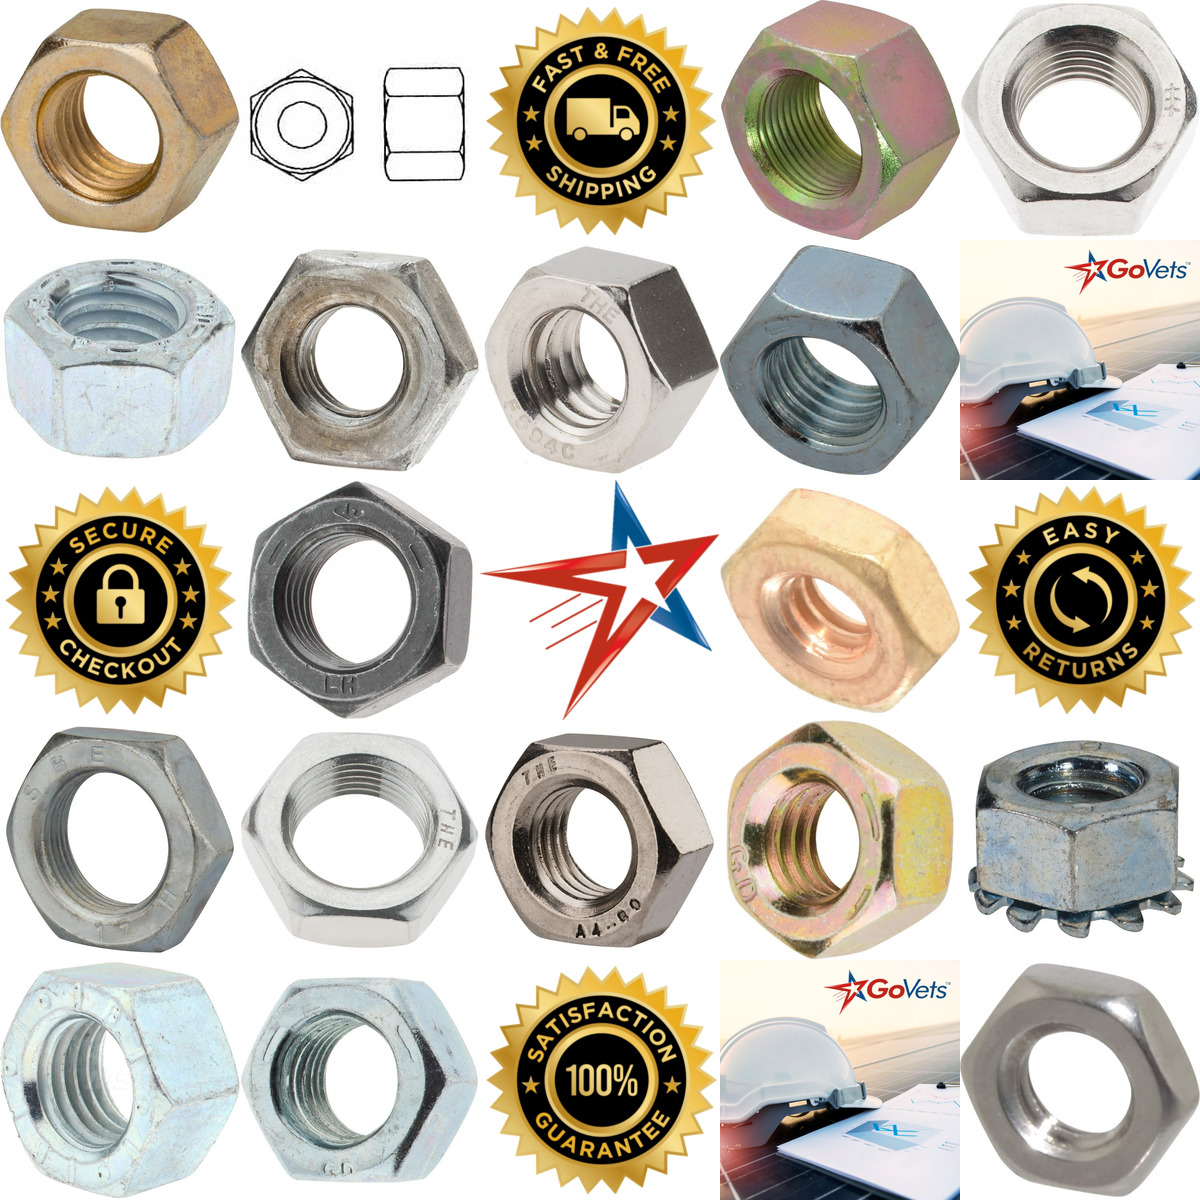 A selection of Hex Nuts products on GoVets